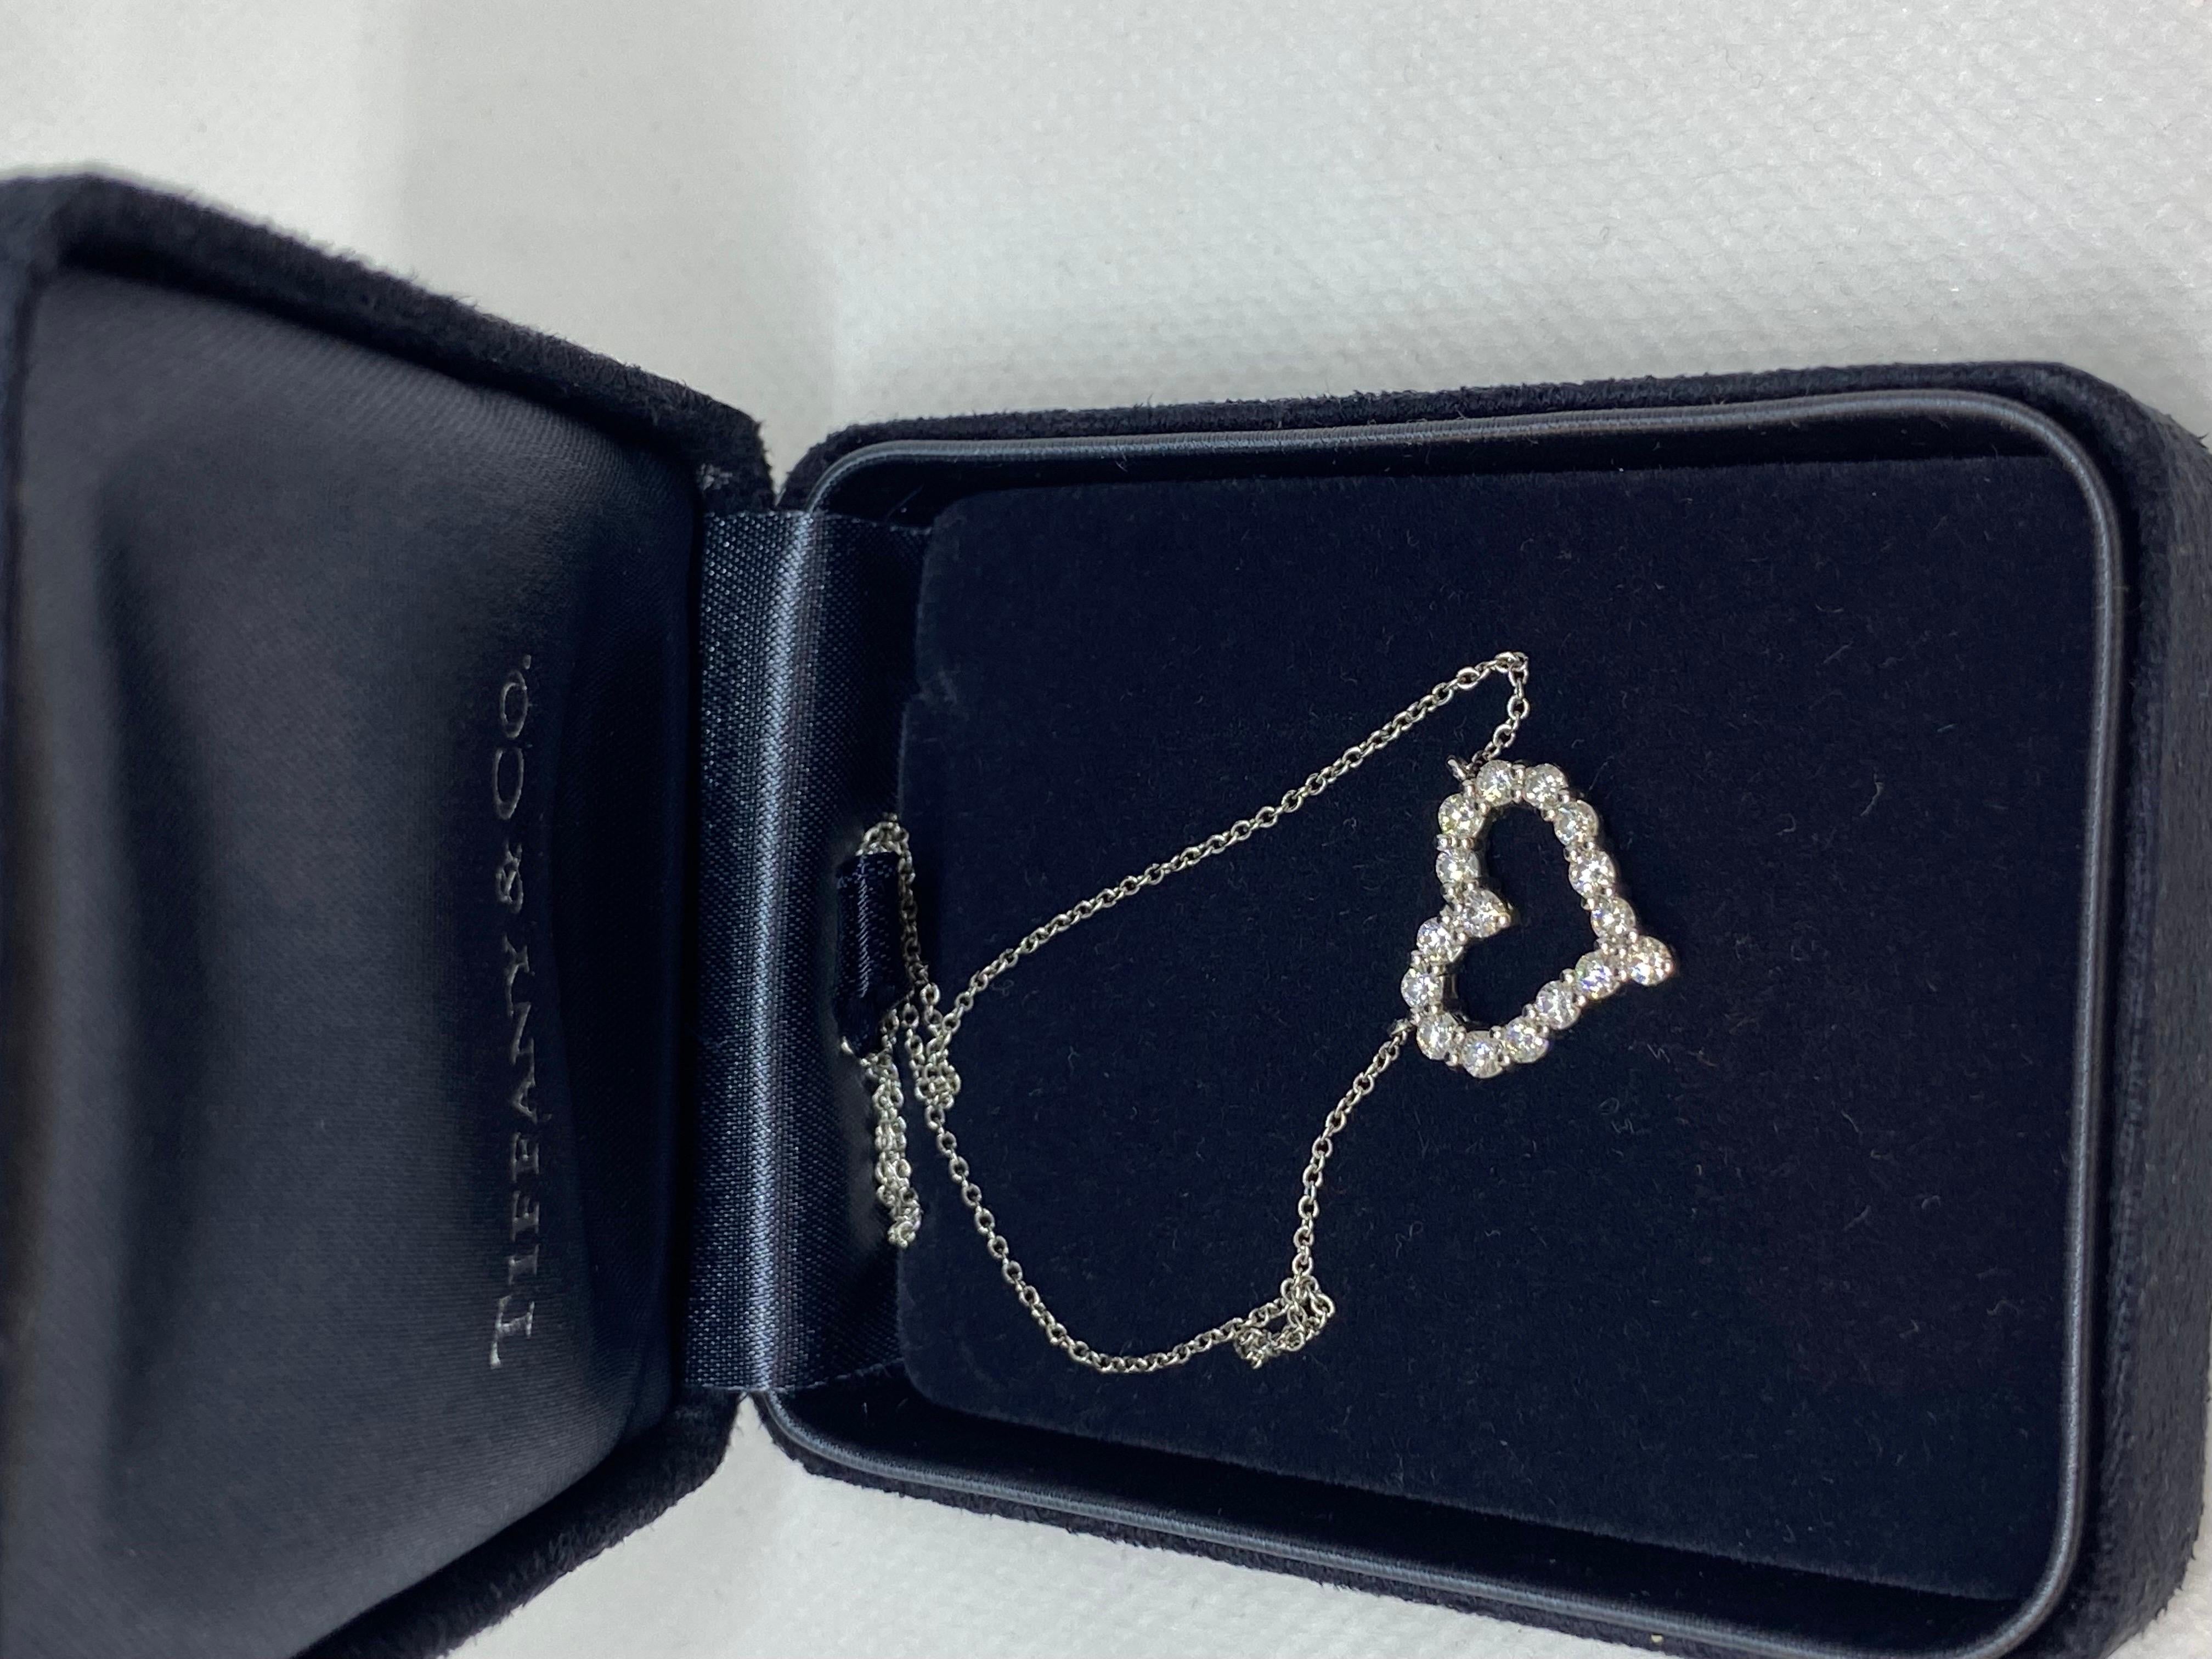 Tiffany & Co White Platinum 950 Heart Diamond Necklace  In Excellent Condition For Sale In Forest Hills, NY